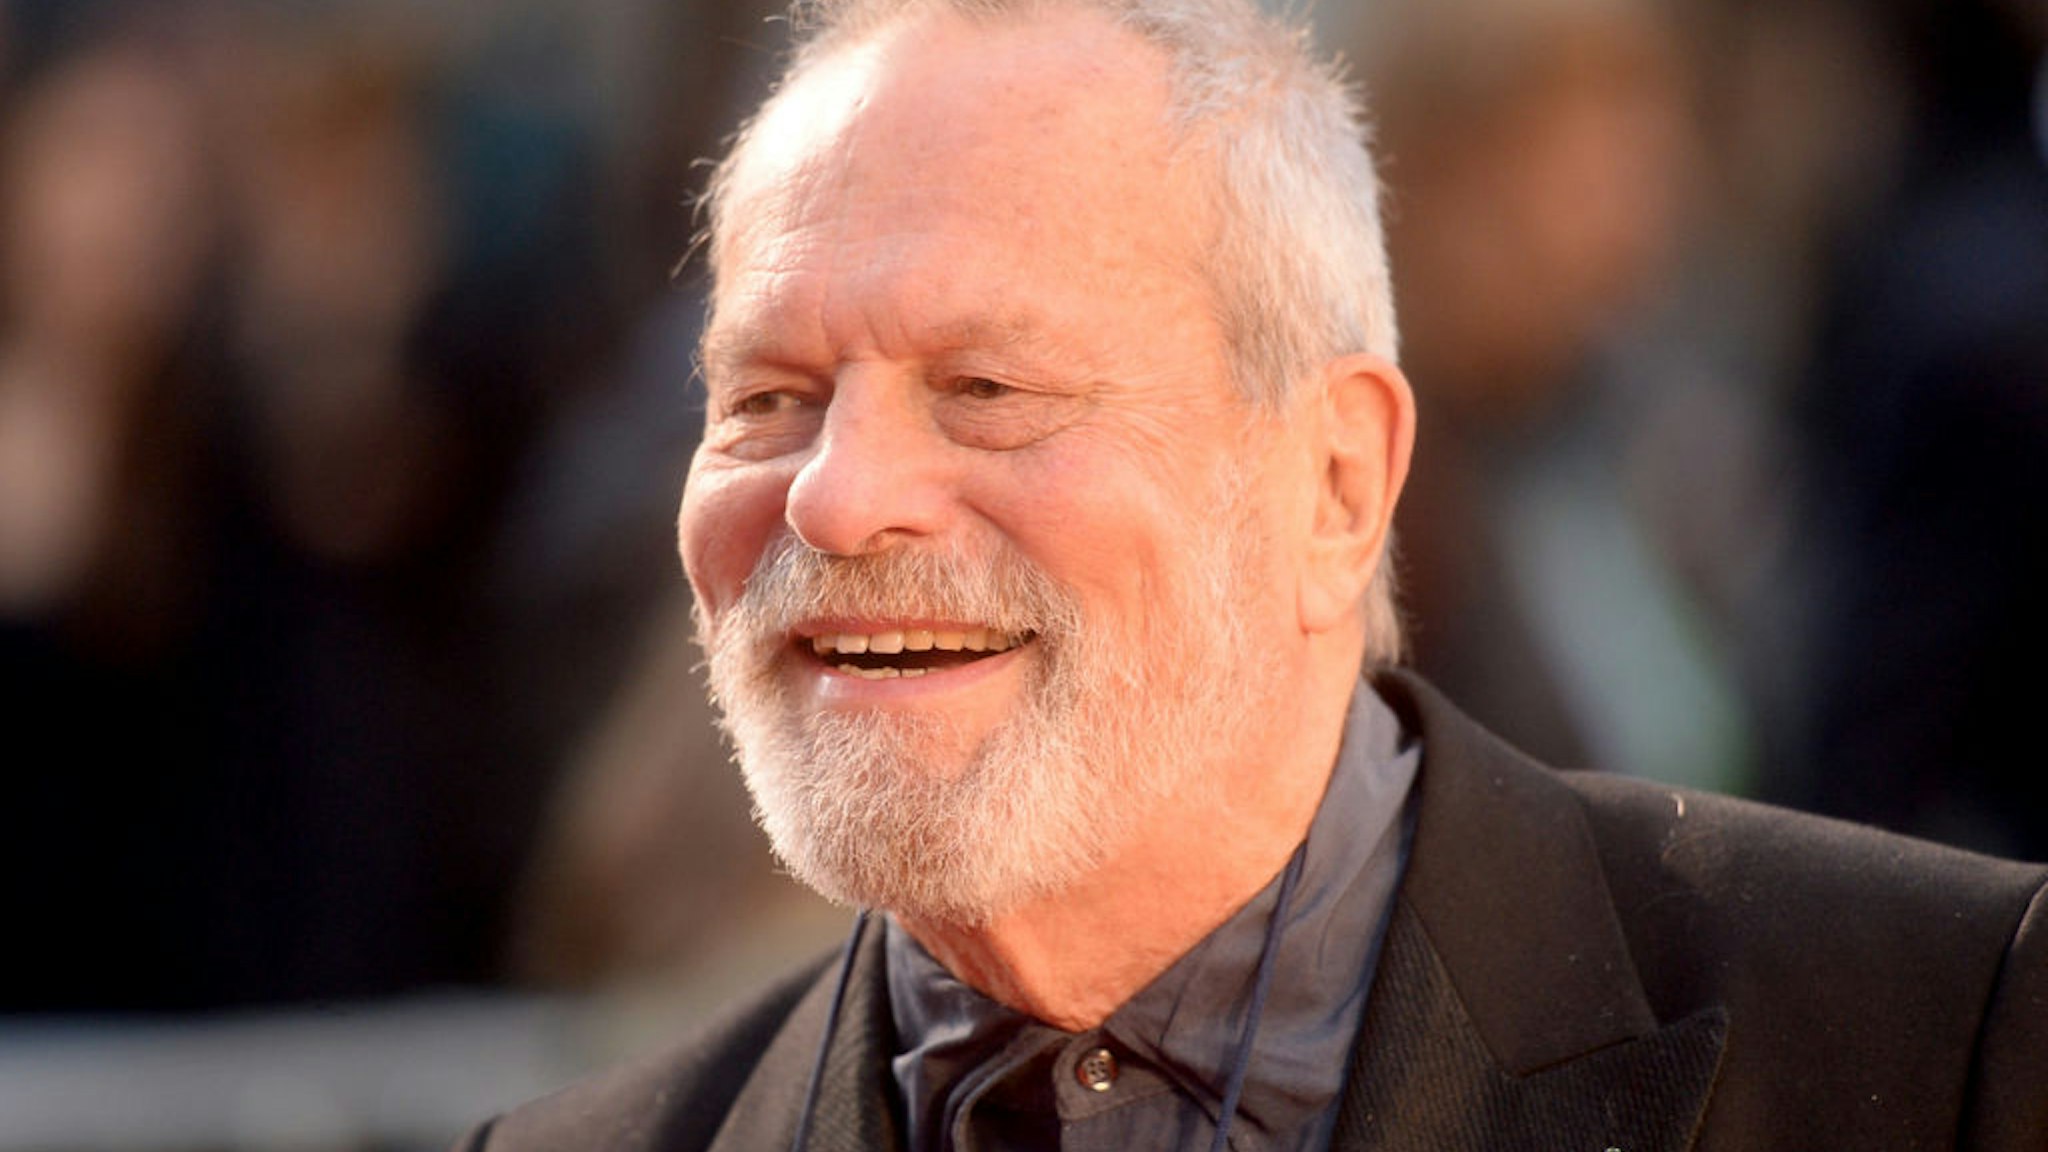 Terry Gilliam attends "The Irishman" International Premiere and Closing Gala during the 63rd BFI London Film Festival at the Odeon Luxe Leicester Square on October 13, 2019 in London, England.